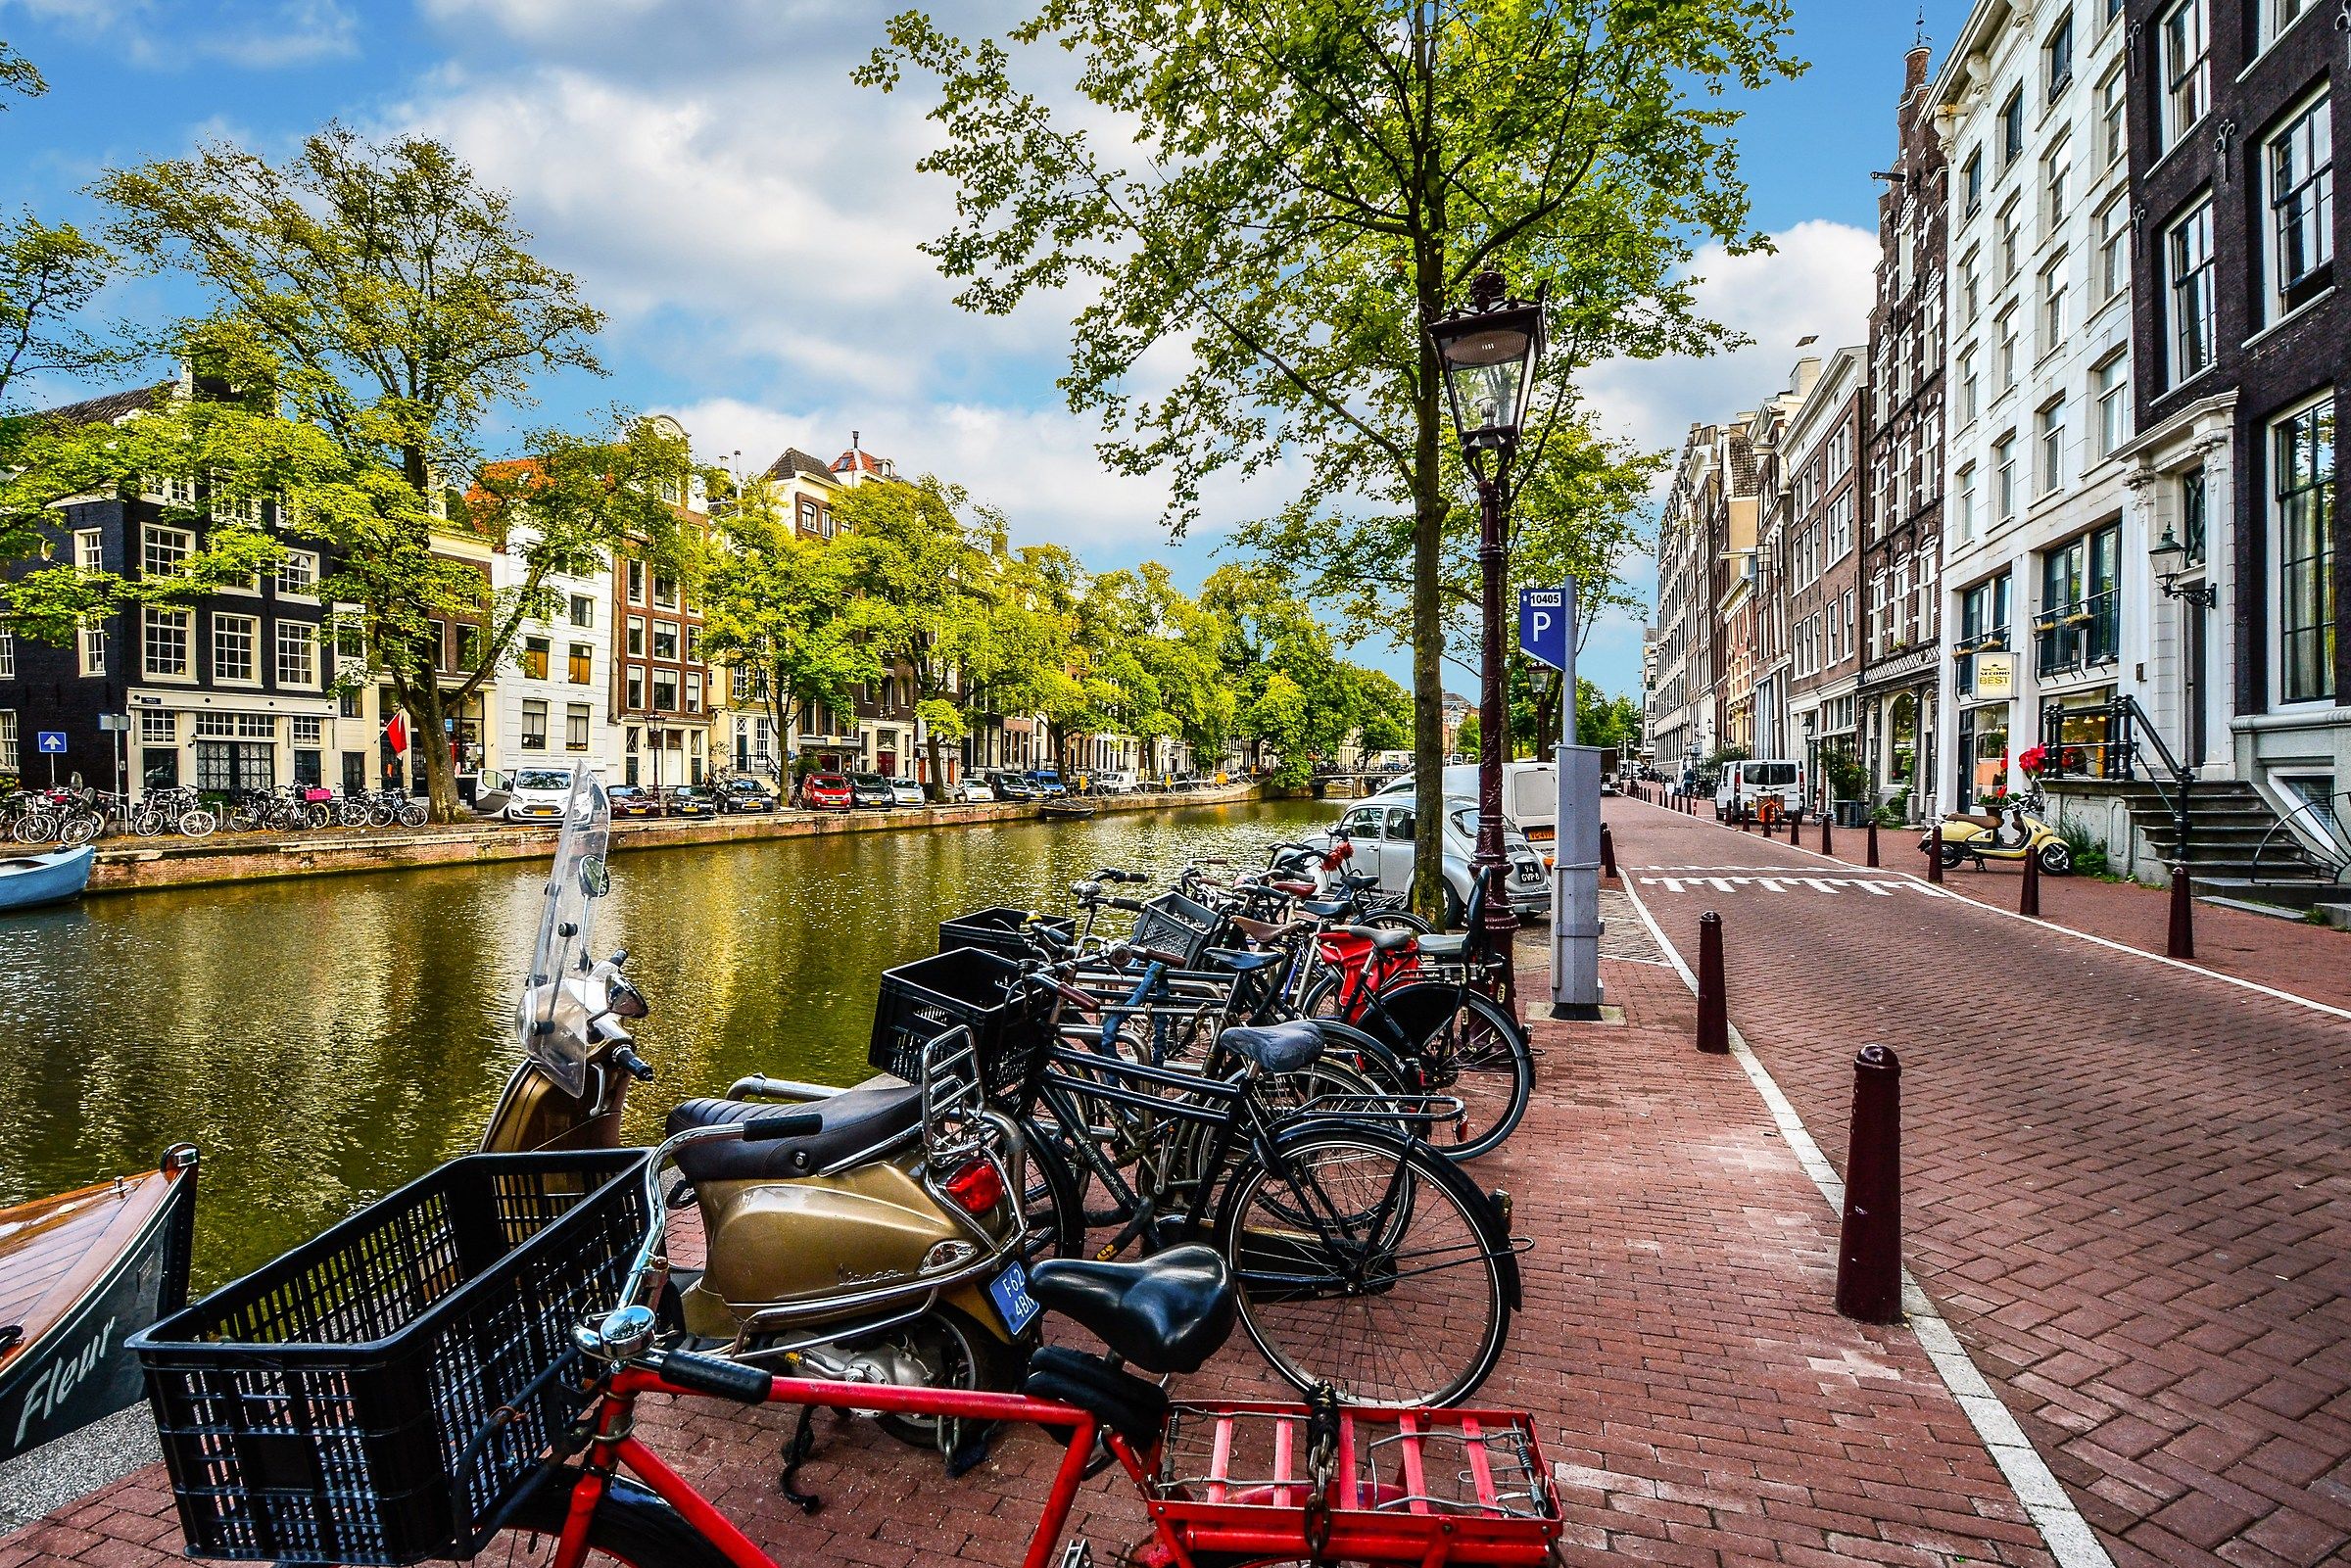 What things to do in Amsterdam